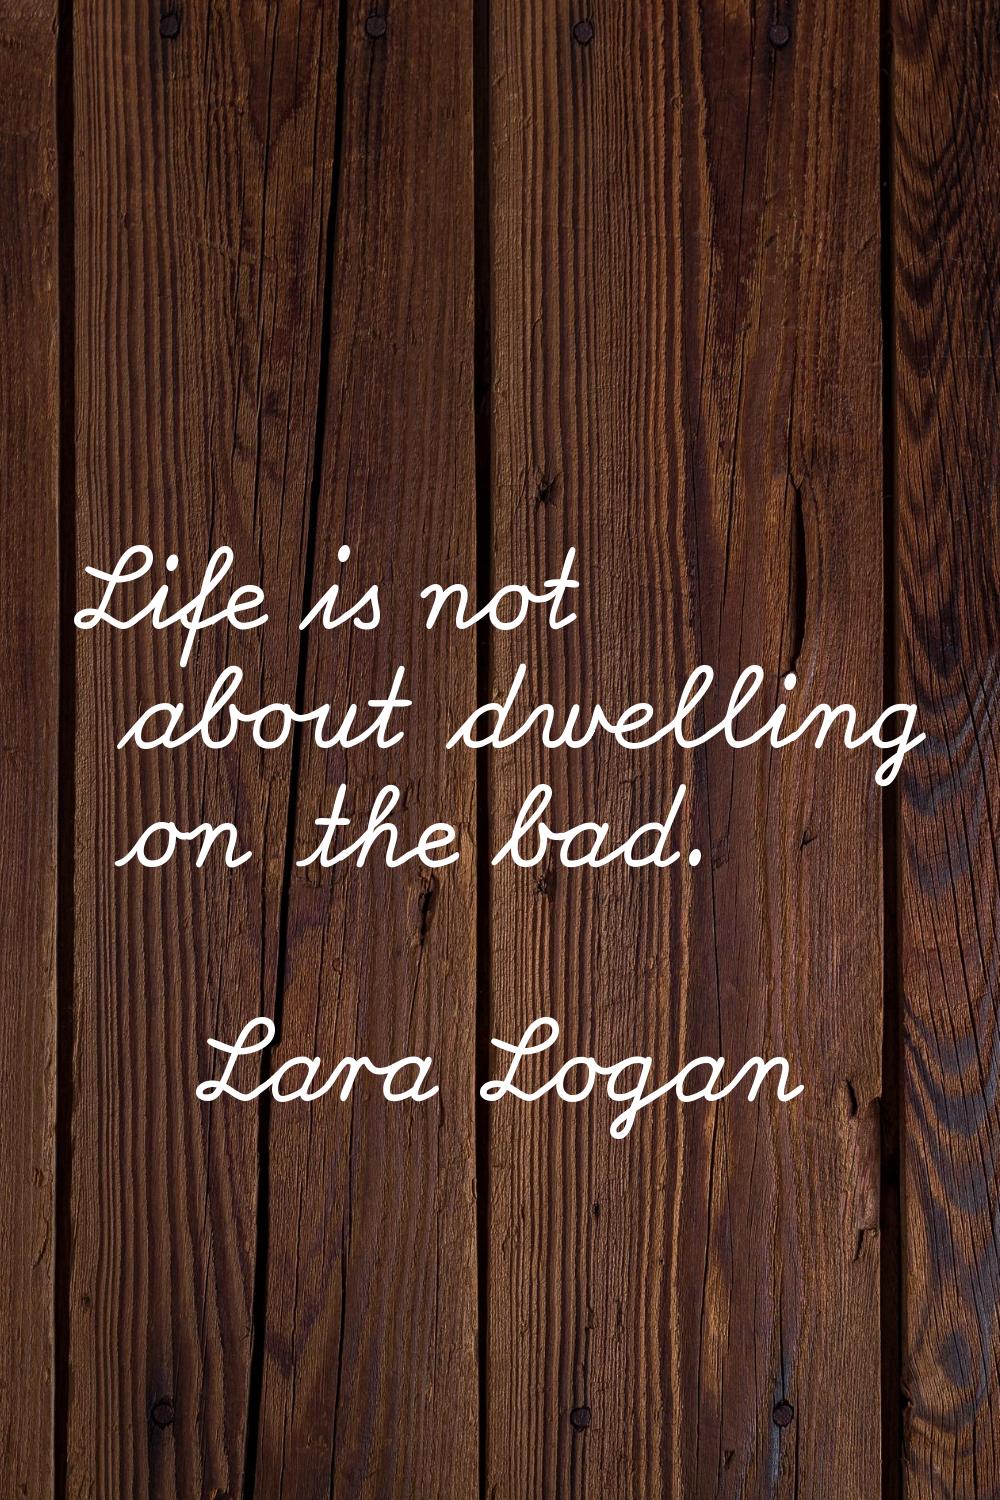 Life is not about dwelling on the bad.